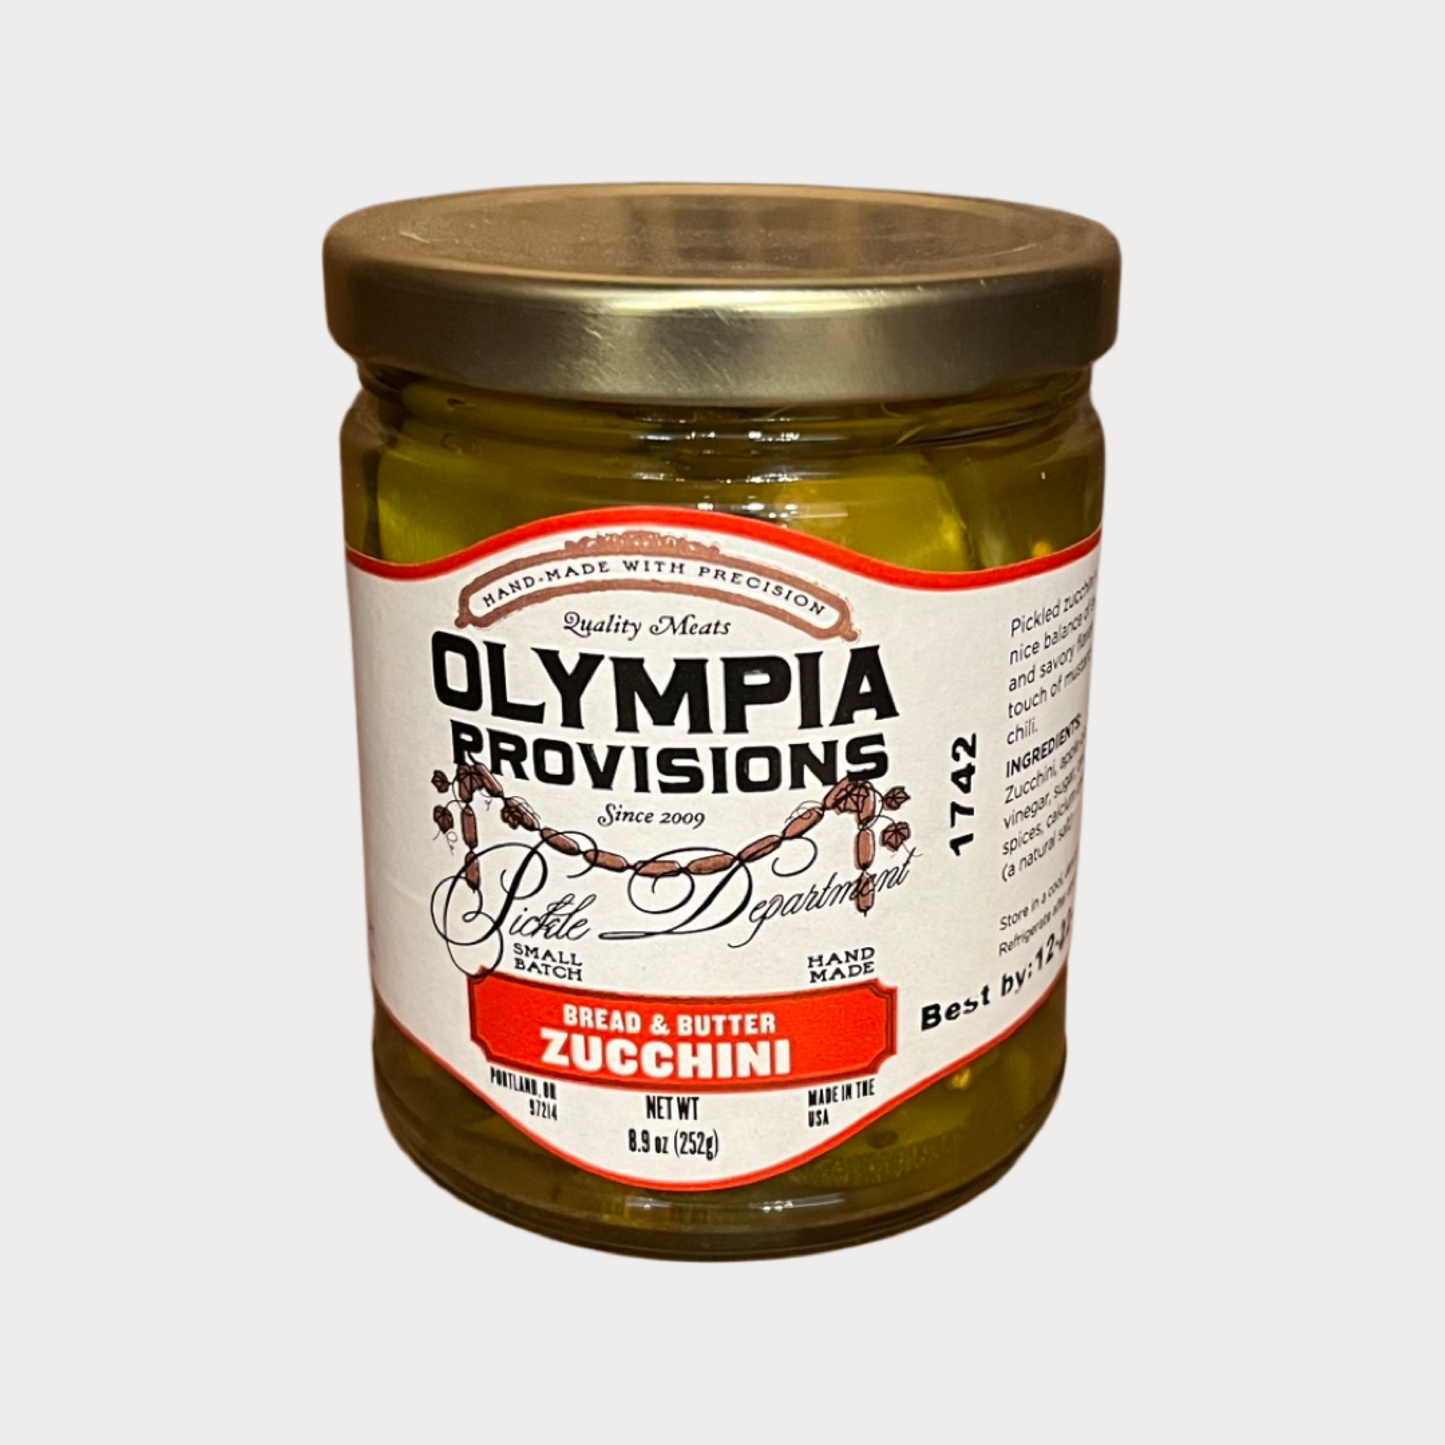 Bread & Butter Pickled Zucchini Olympia Provisions' 8.9oz